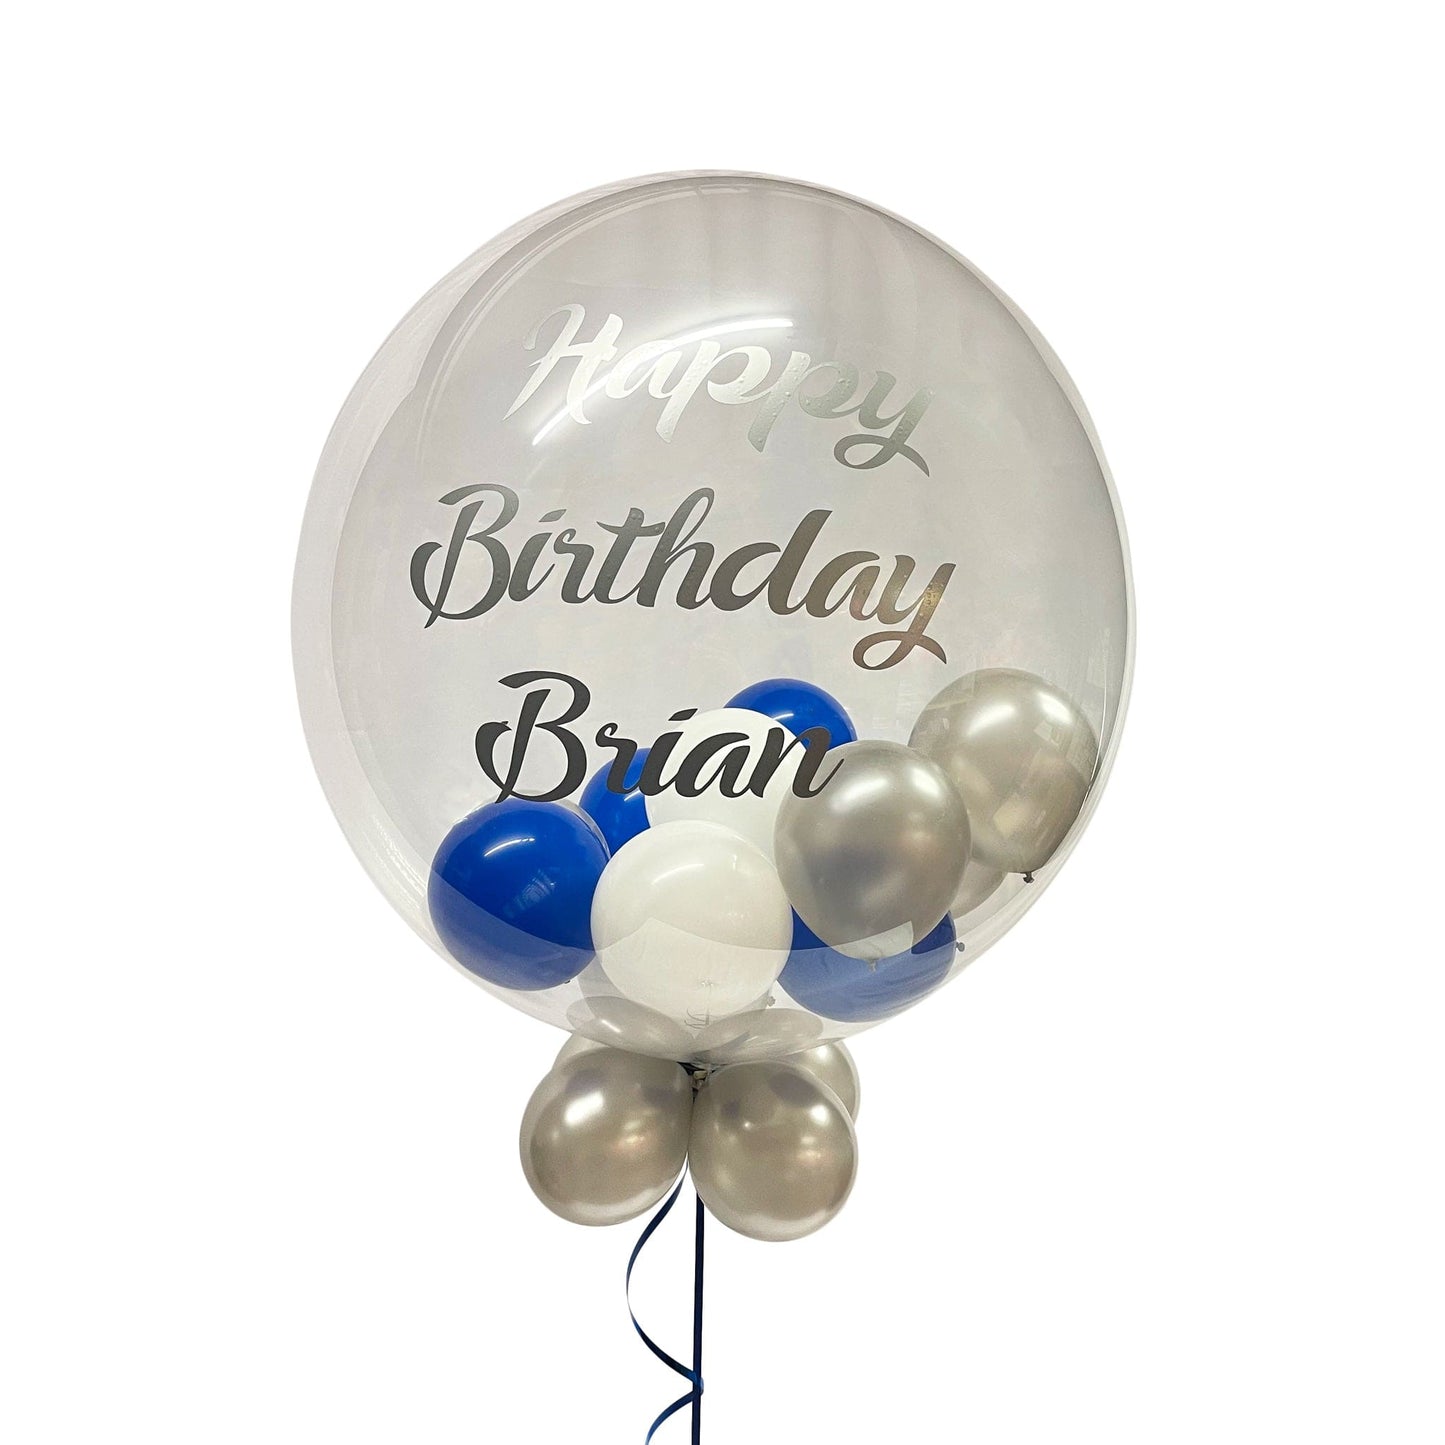 Castle Balloons Balloons Soulful Blue Bubble with Vinyl Writing